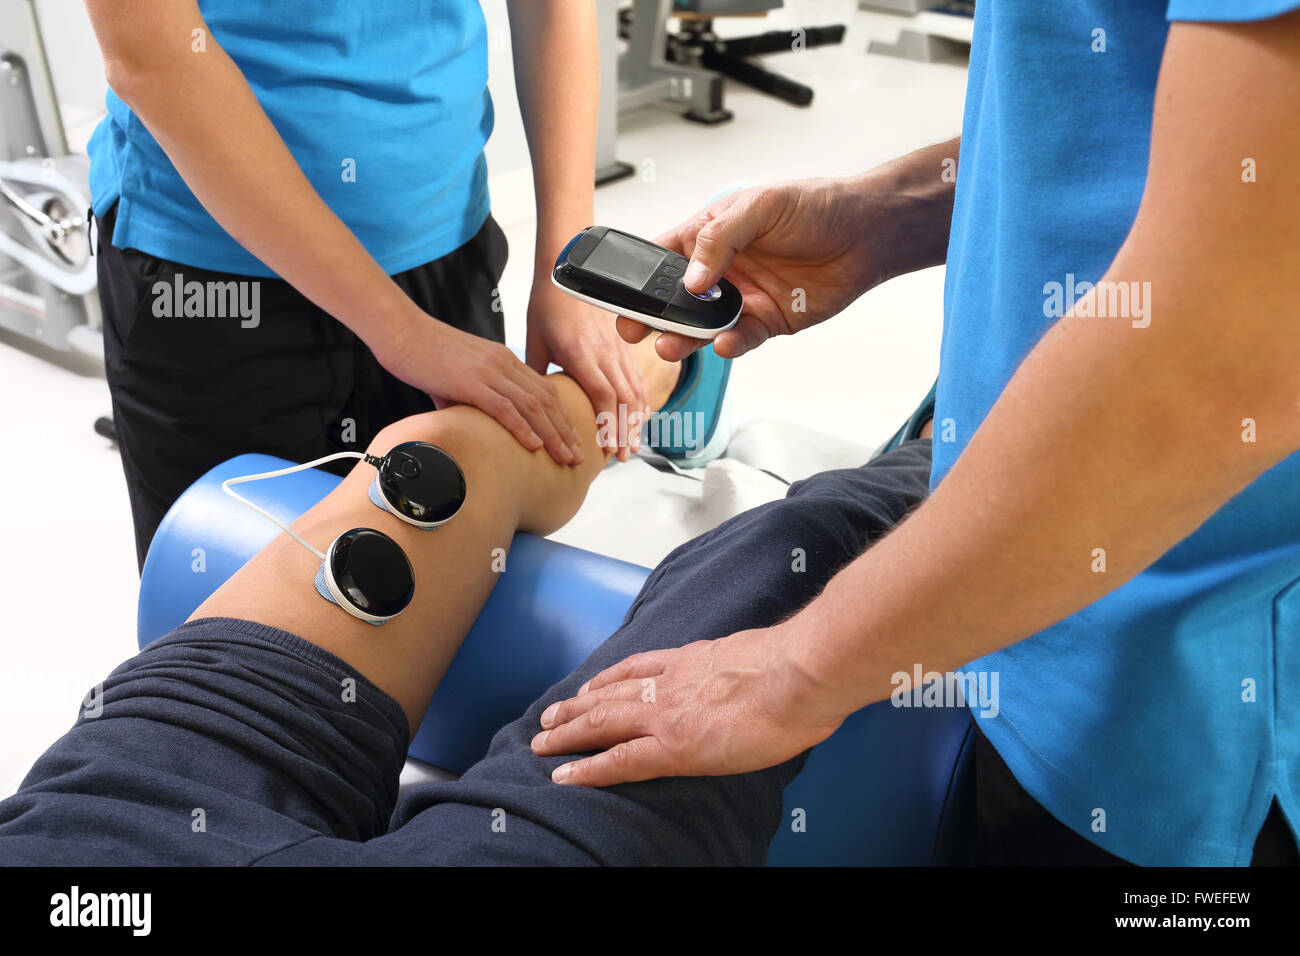 https://c8.alamy.com/comp/FWEFEW/physiotherapist-doctor-performs-surgery-on-a-patients-leg-muscle-electrostimulation-FWEFEW.jpg